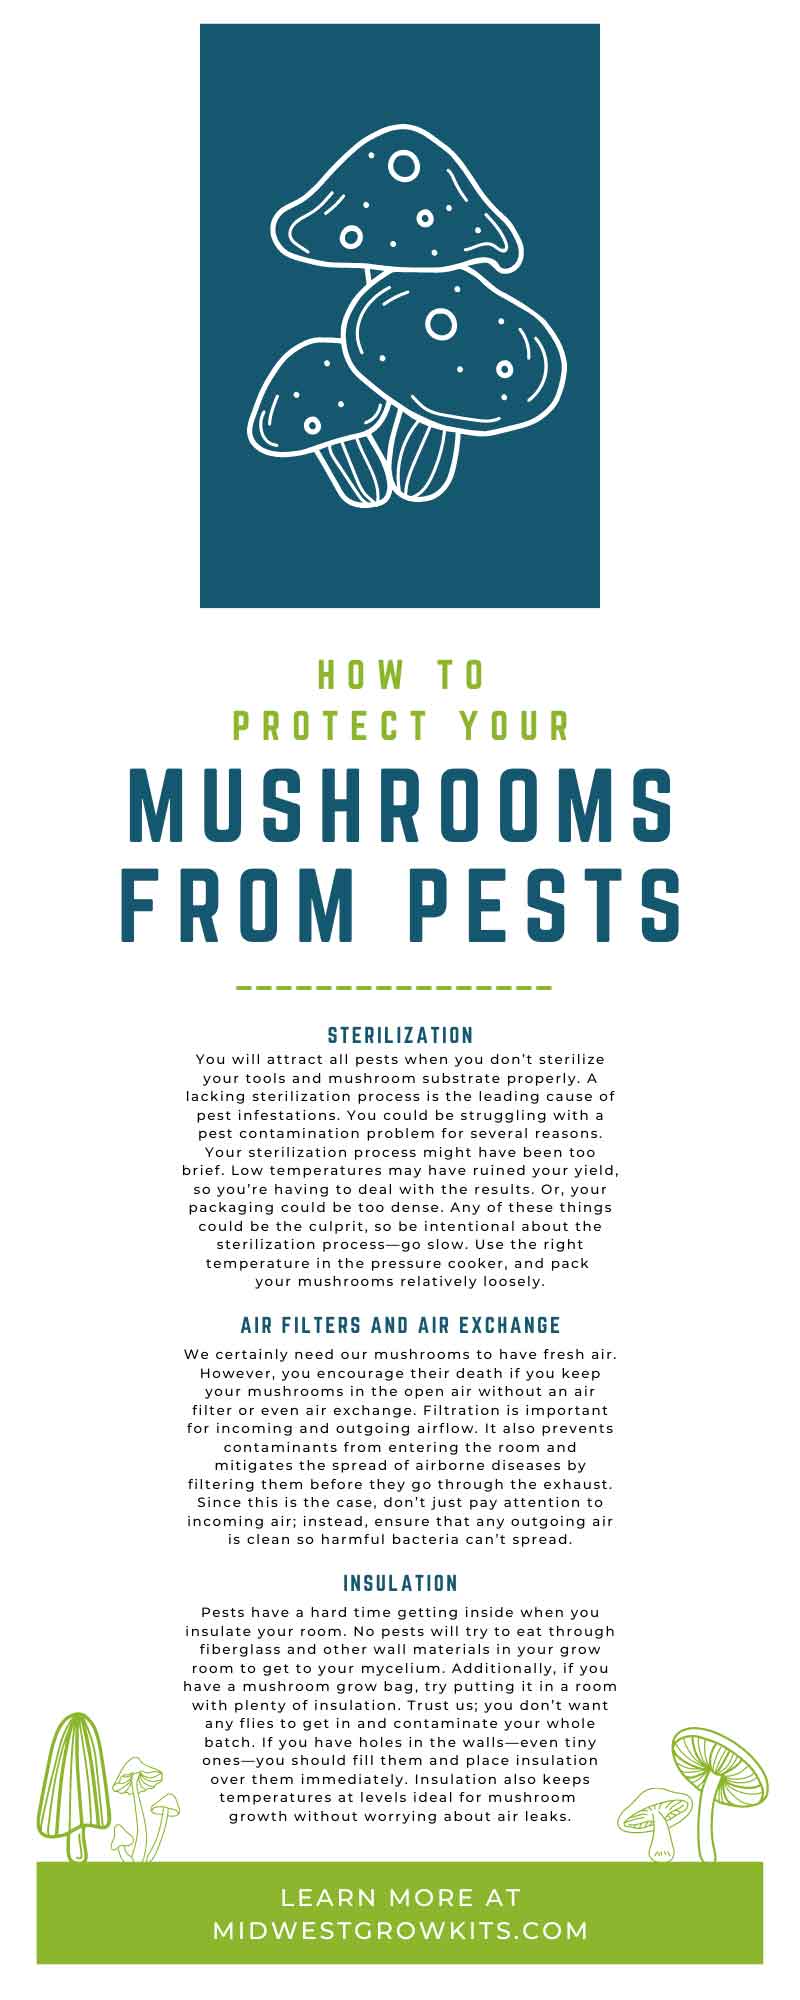 How To Protect Your Mushrooms From Pests